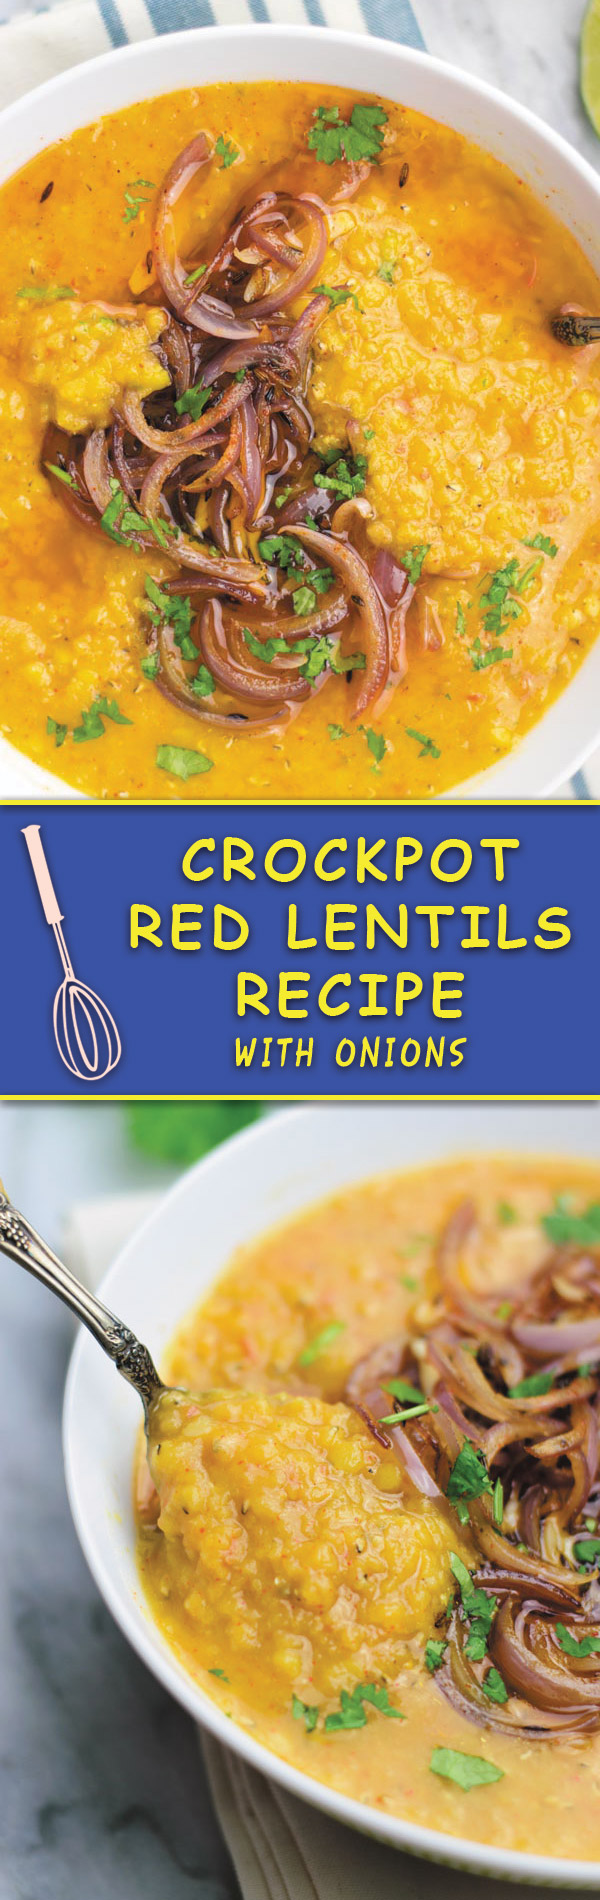 Easy Crockpot Red Lentils - Creamy red lentils made in slow cooker, served with tempered onions. This MEAL I can eat everyday! Simple, CHEAP & delicious!